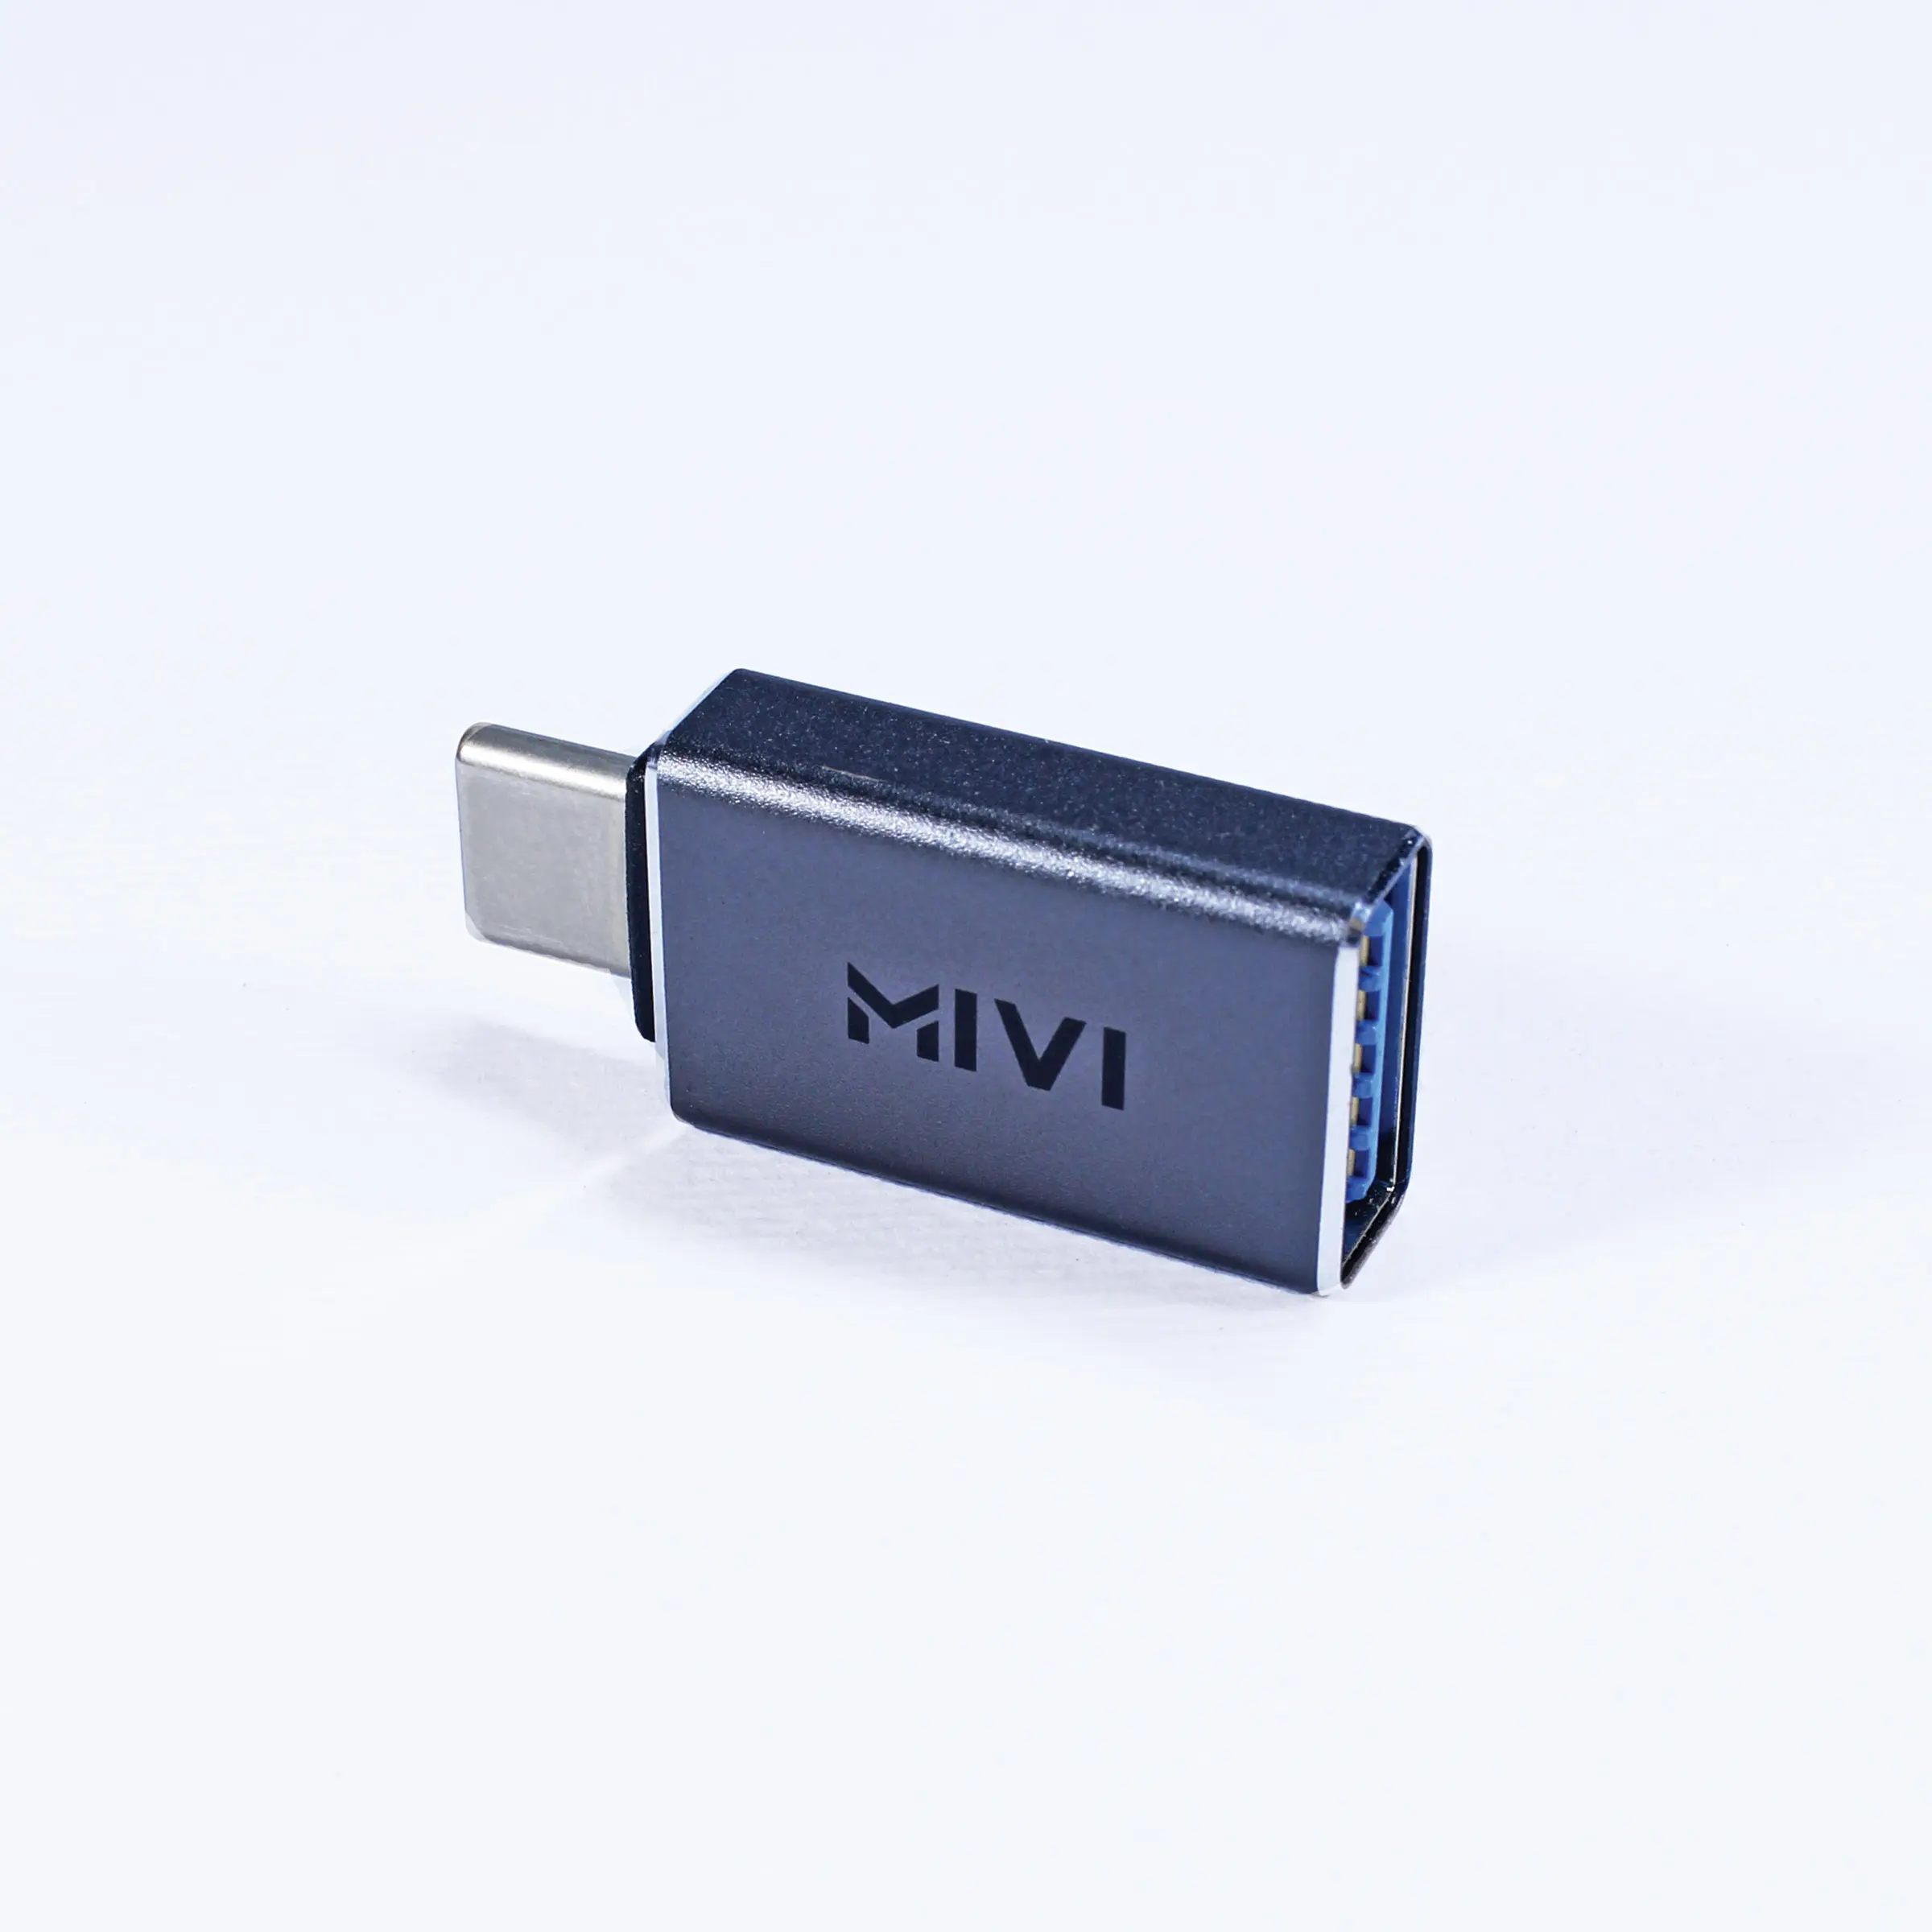 A grey USB drive represents our website design work for Data Rescue MD.